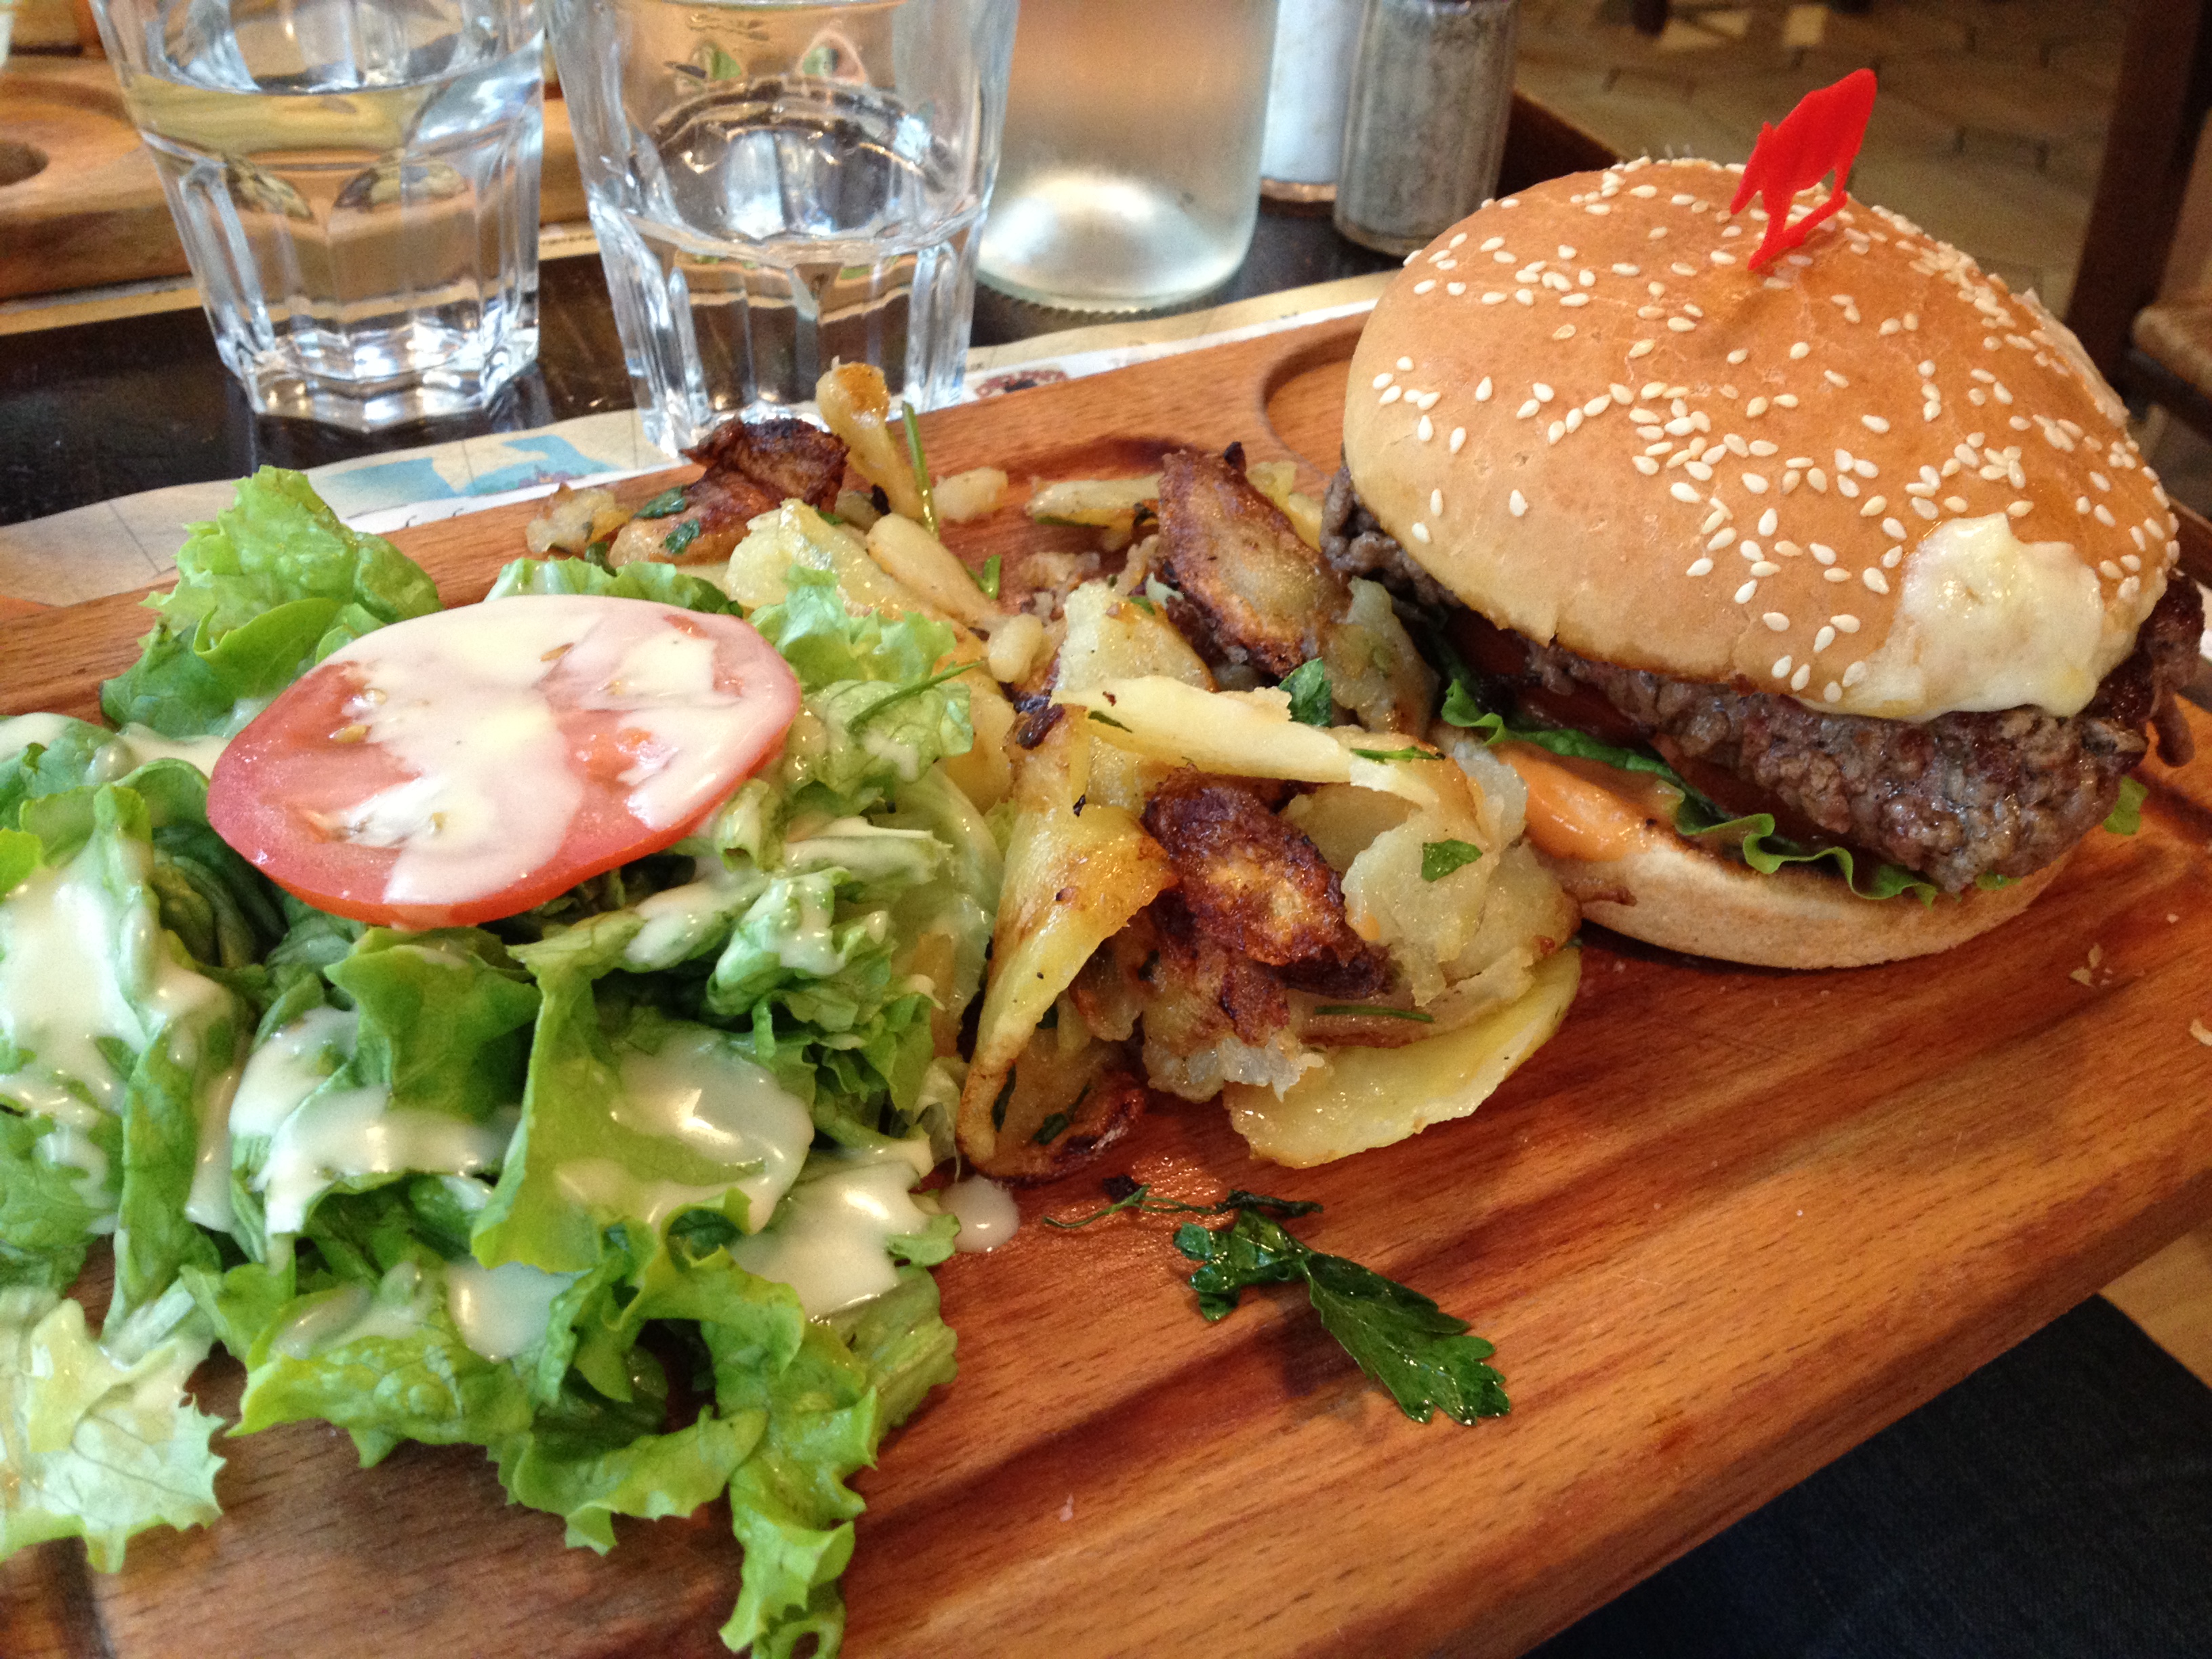 « Juliachou approved » : the « Burger Cantalou » from the restaurant Chez Papa